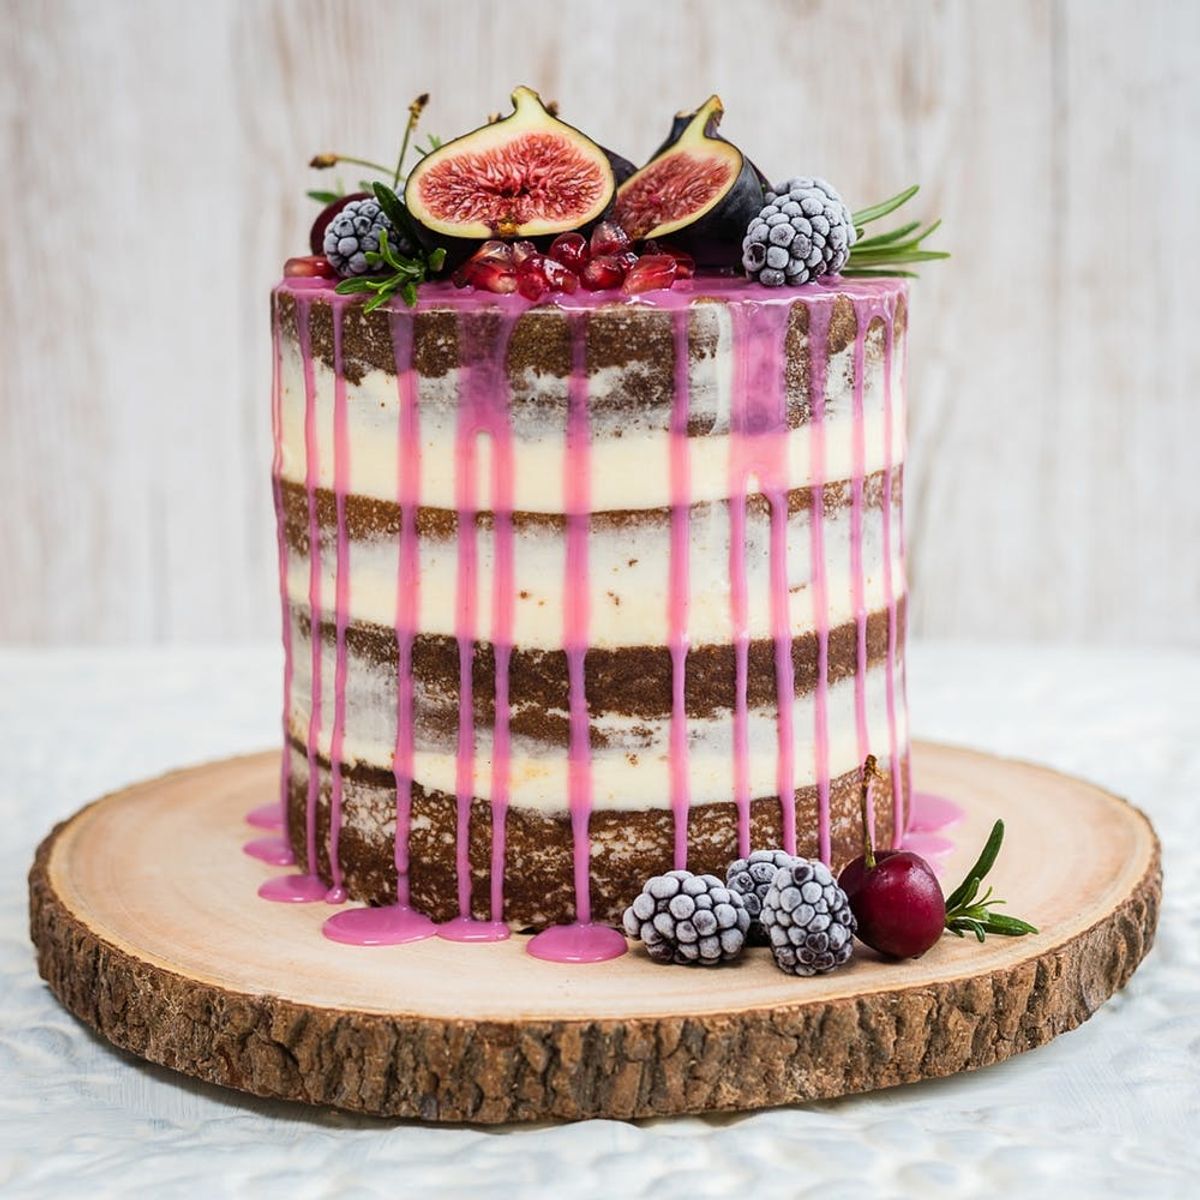 We’re Drooling Over This Wildly Romantic Drip Layer Cake That’s Perfect for Your Bridal Shower